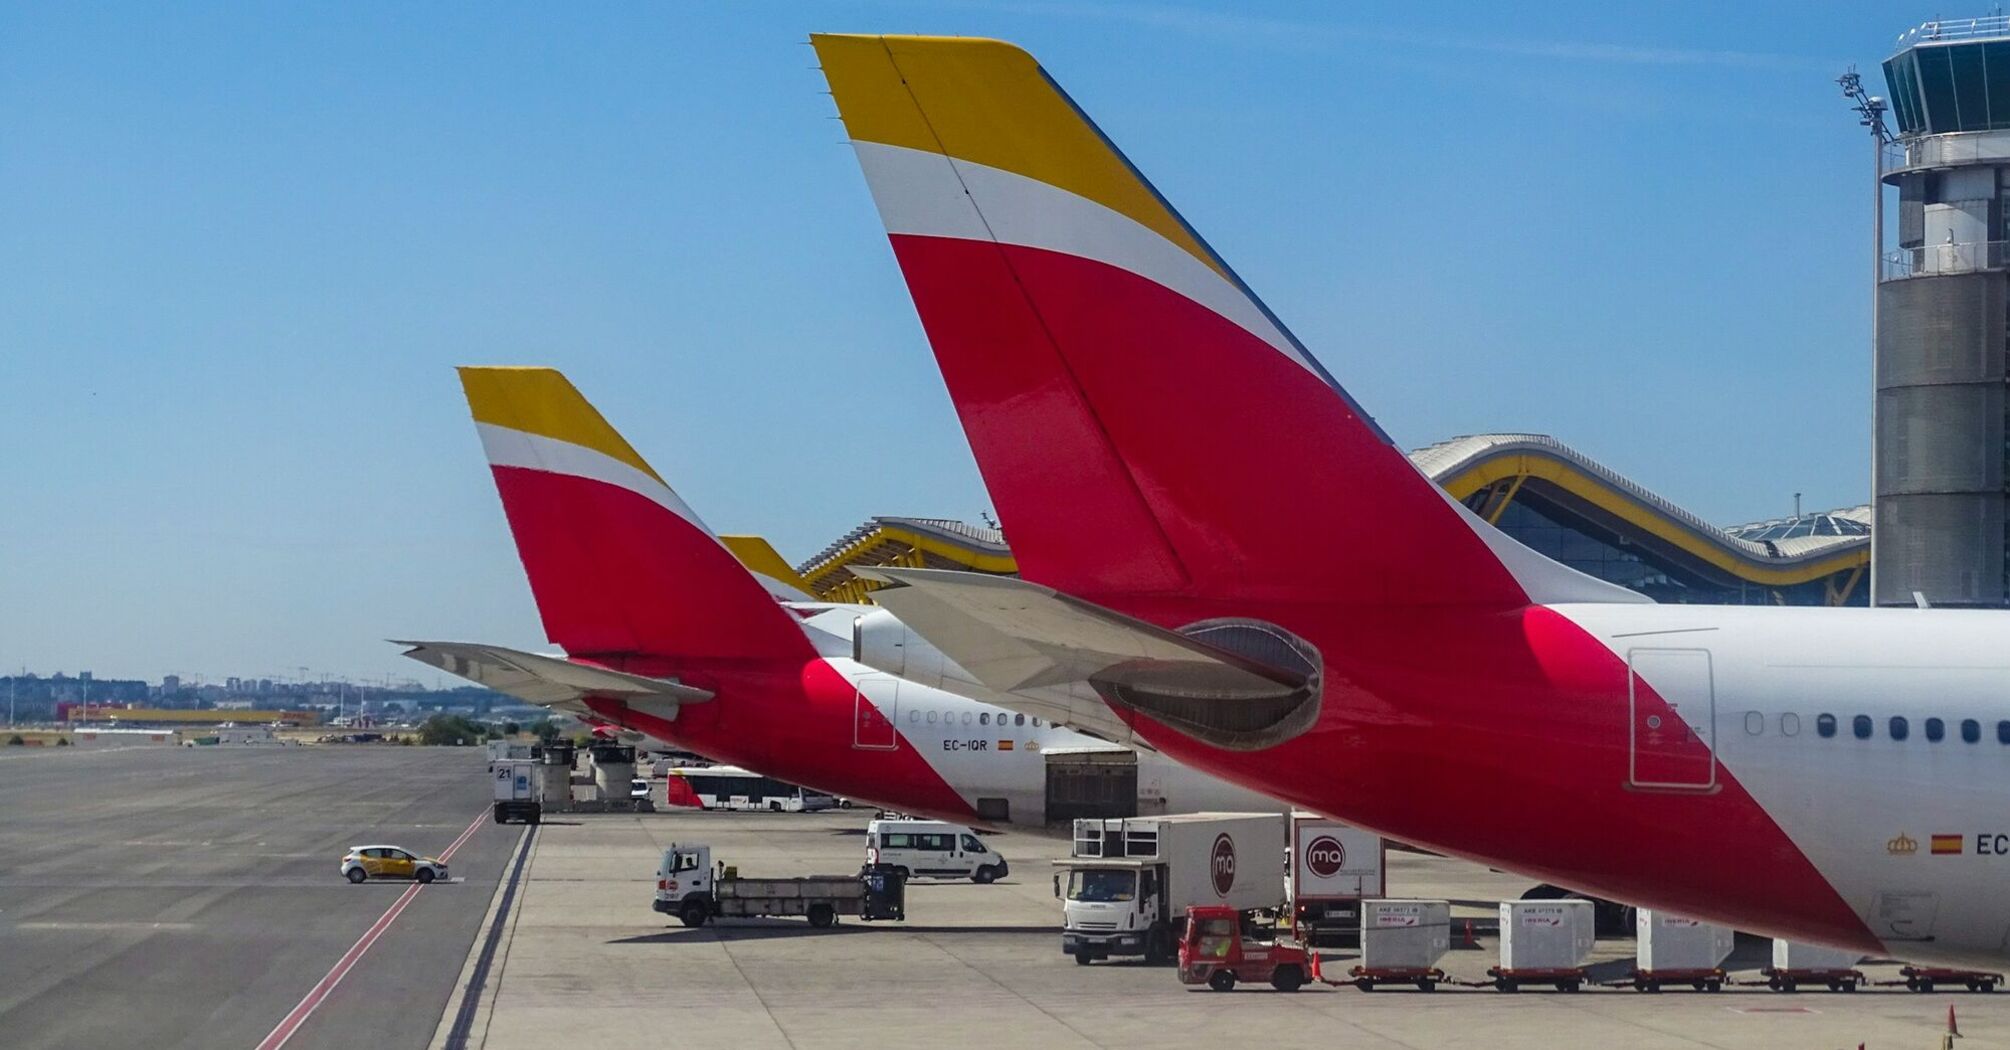 Iberia aircraft tails at an airport